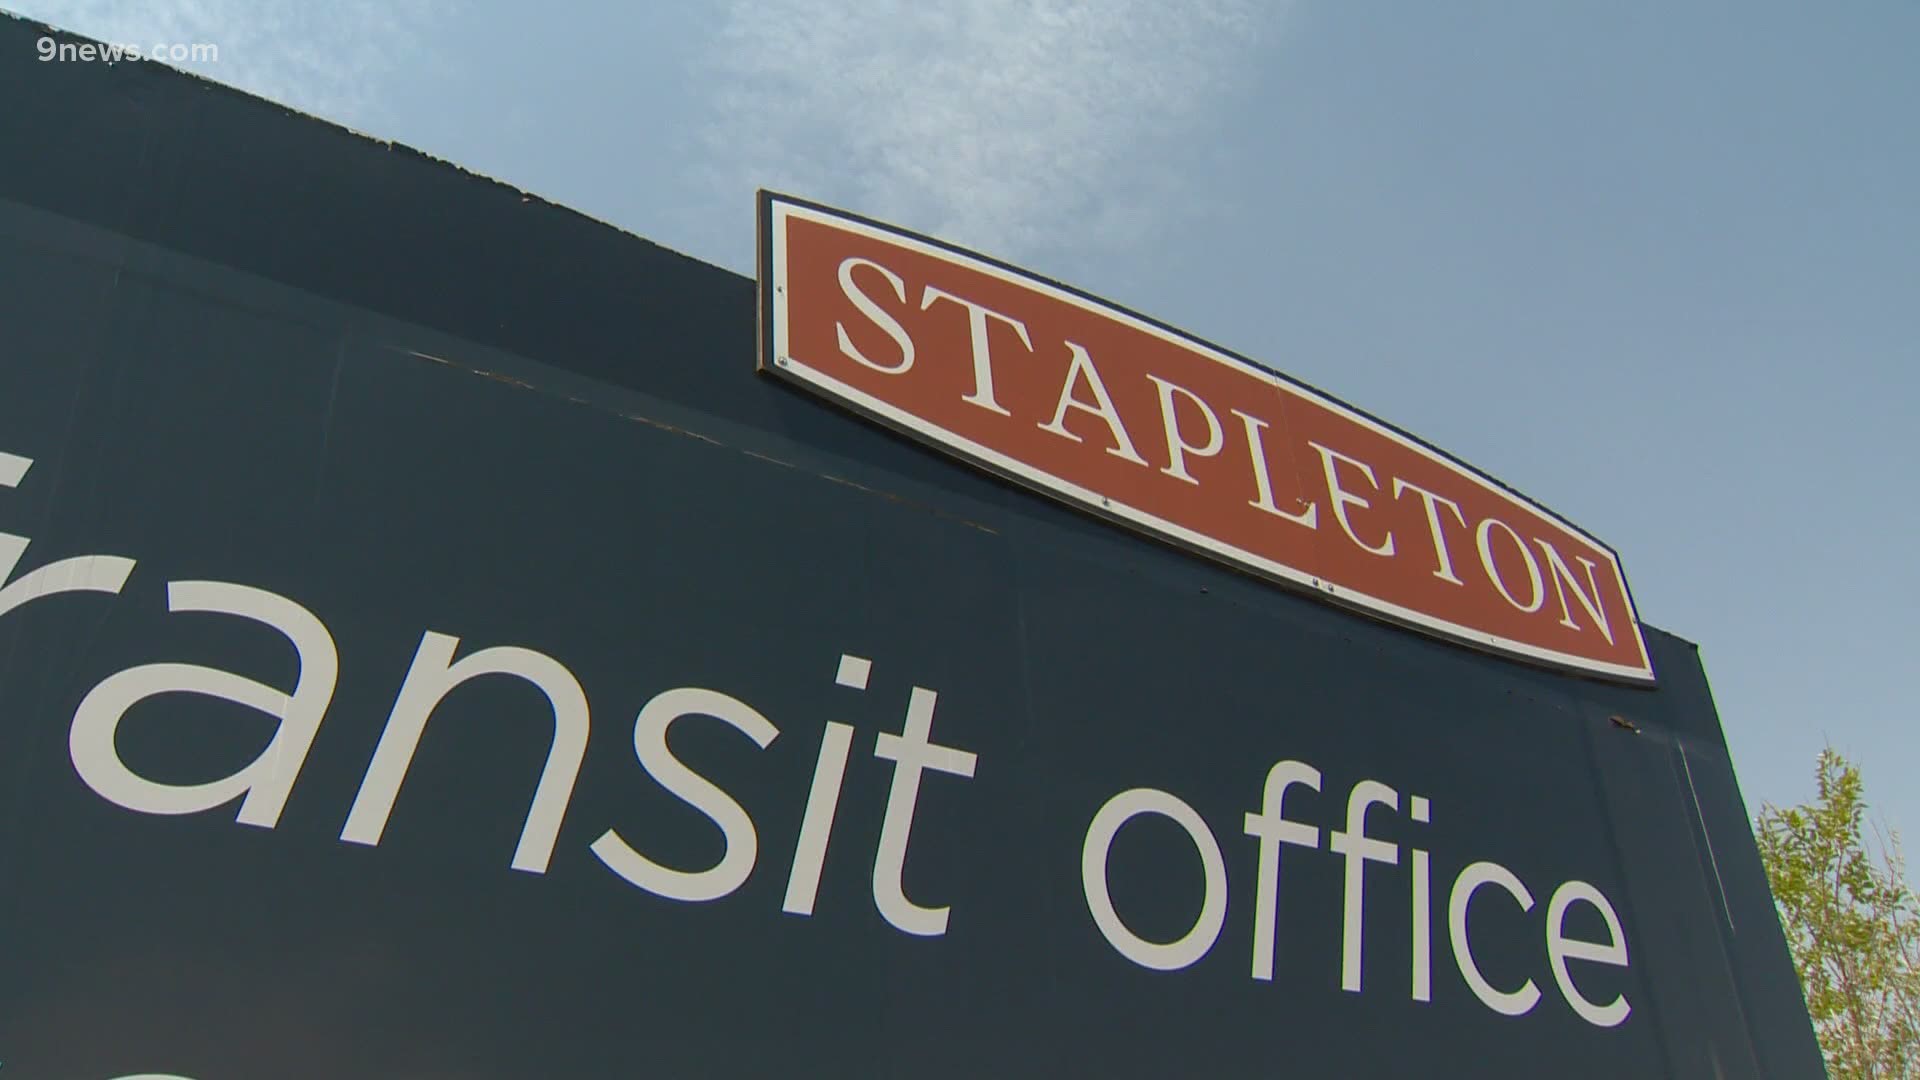 Stapleton already has near 100 suggestions for a new name. It is currently named after a former Denver mayor who was a member of the KKK.